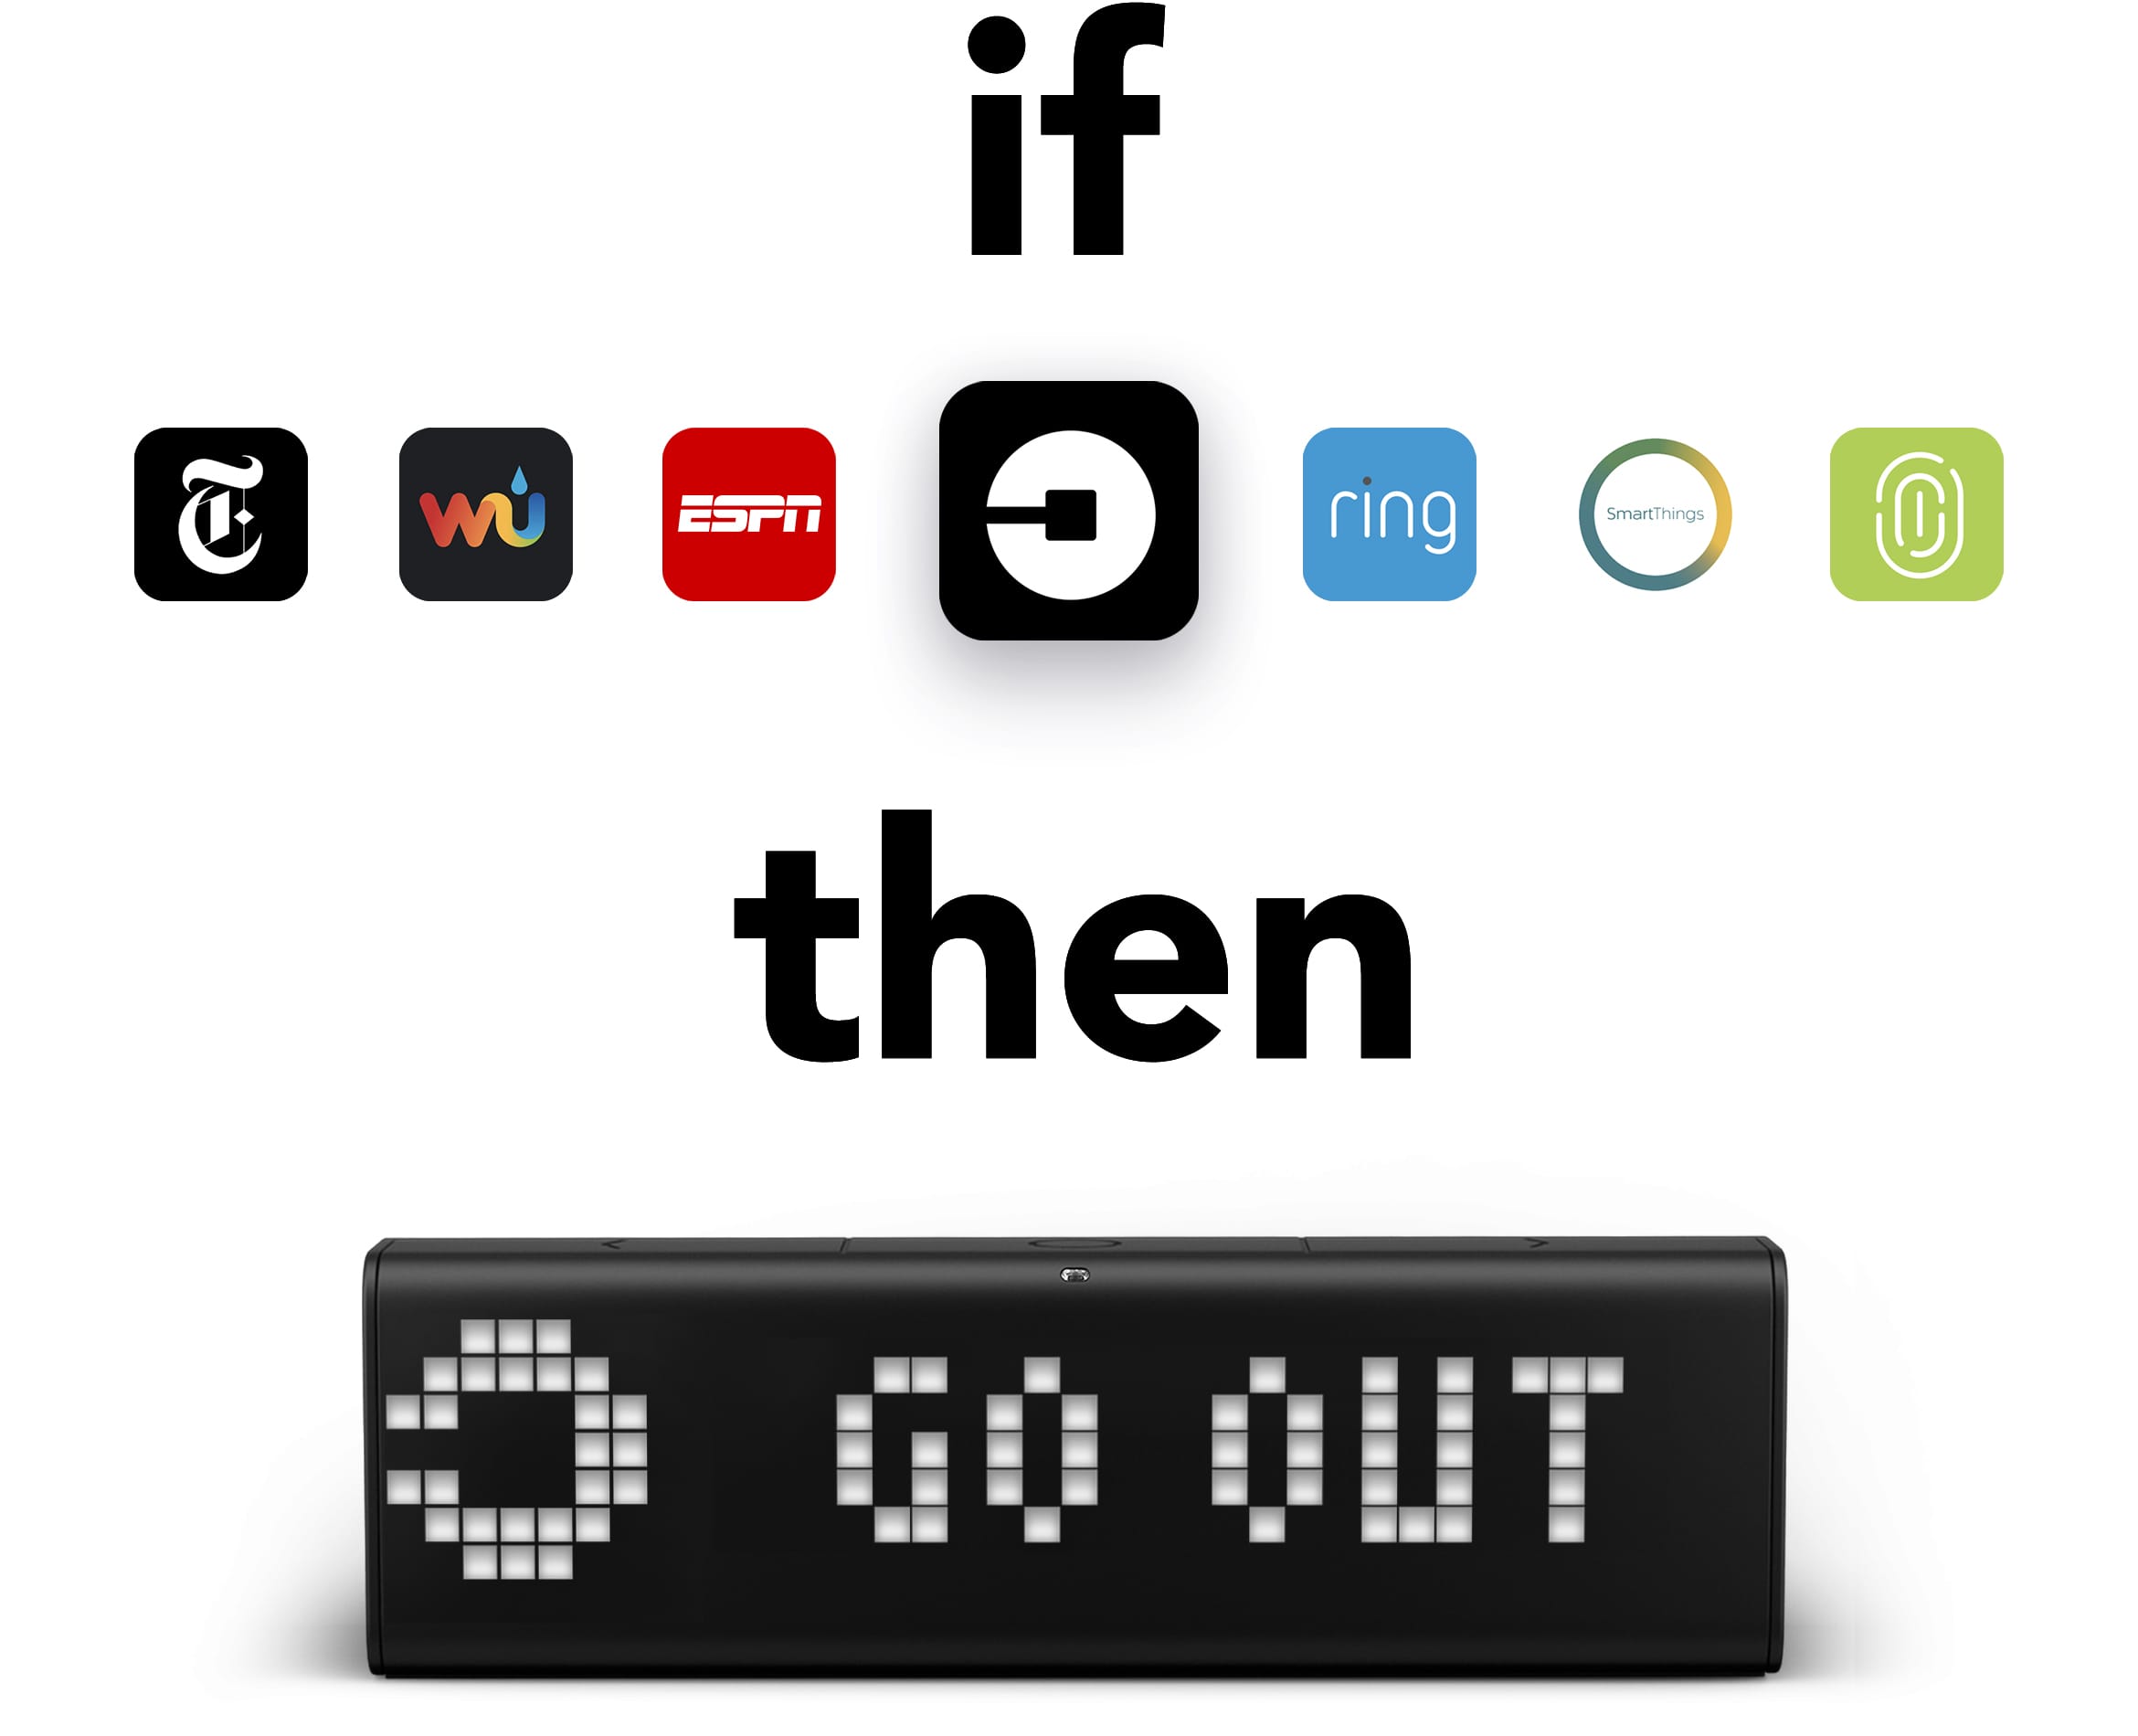 LaMetric Time smart clock's integration with IFTTT displaying a message "Go Out" after you ordered Uber and a car has arrived